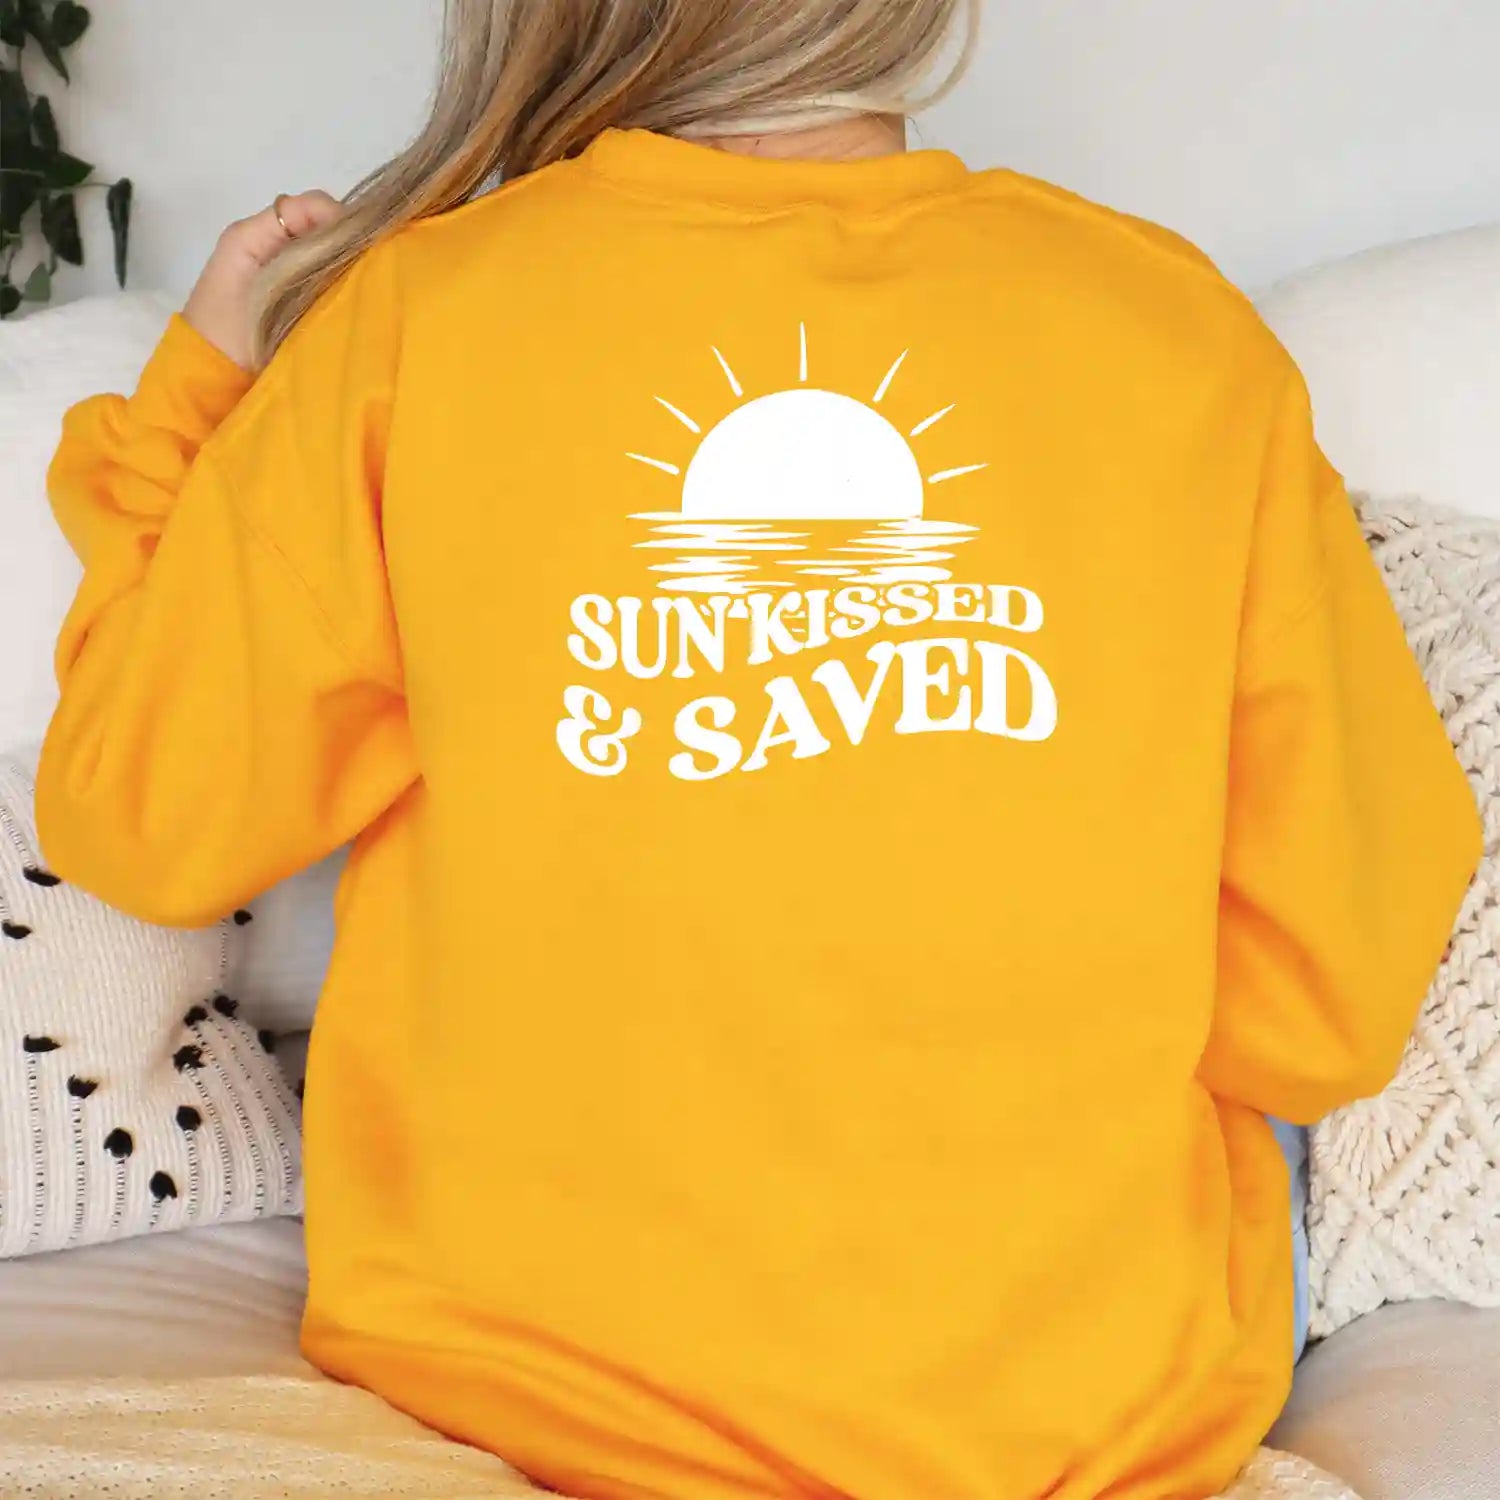 A woman wearing a Sunkissed & Saved Sweatshirt by Be Still and Know that exudes warmth and faith with the phrase "sun kissed" displayed.